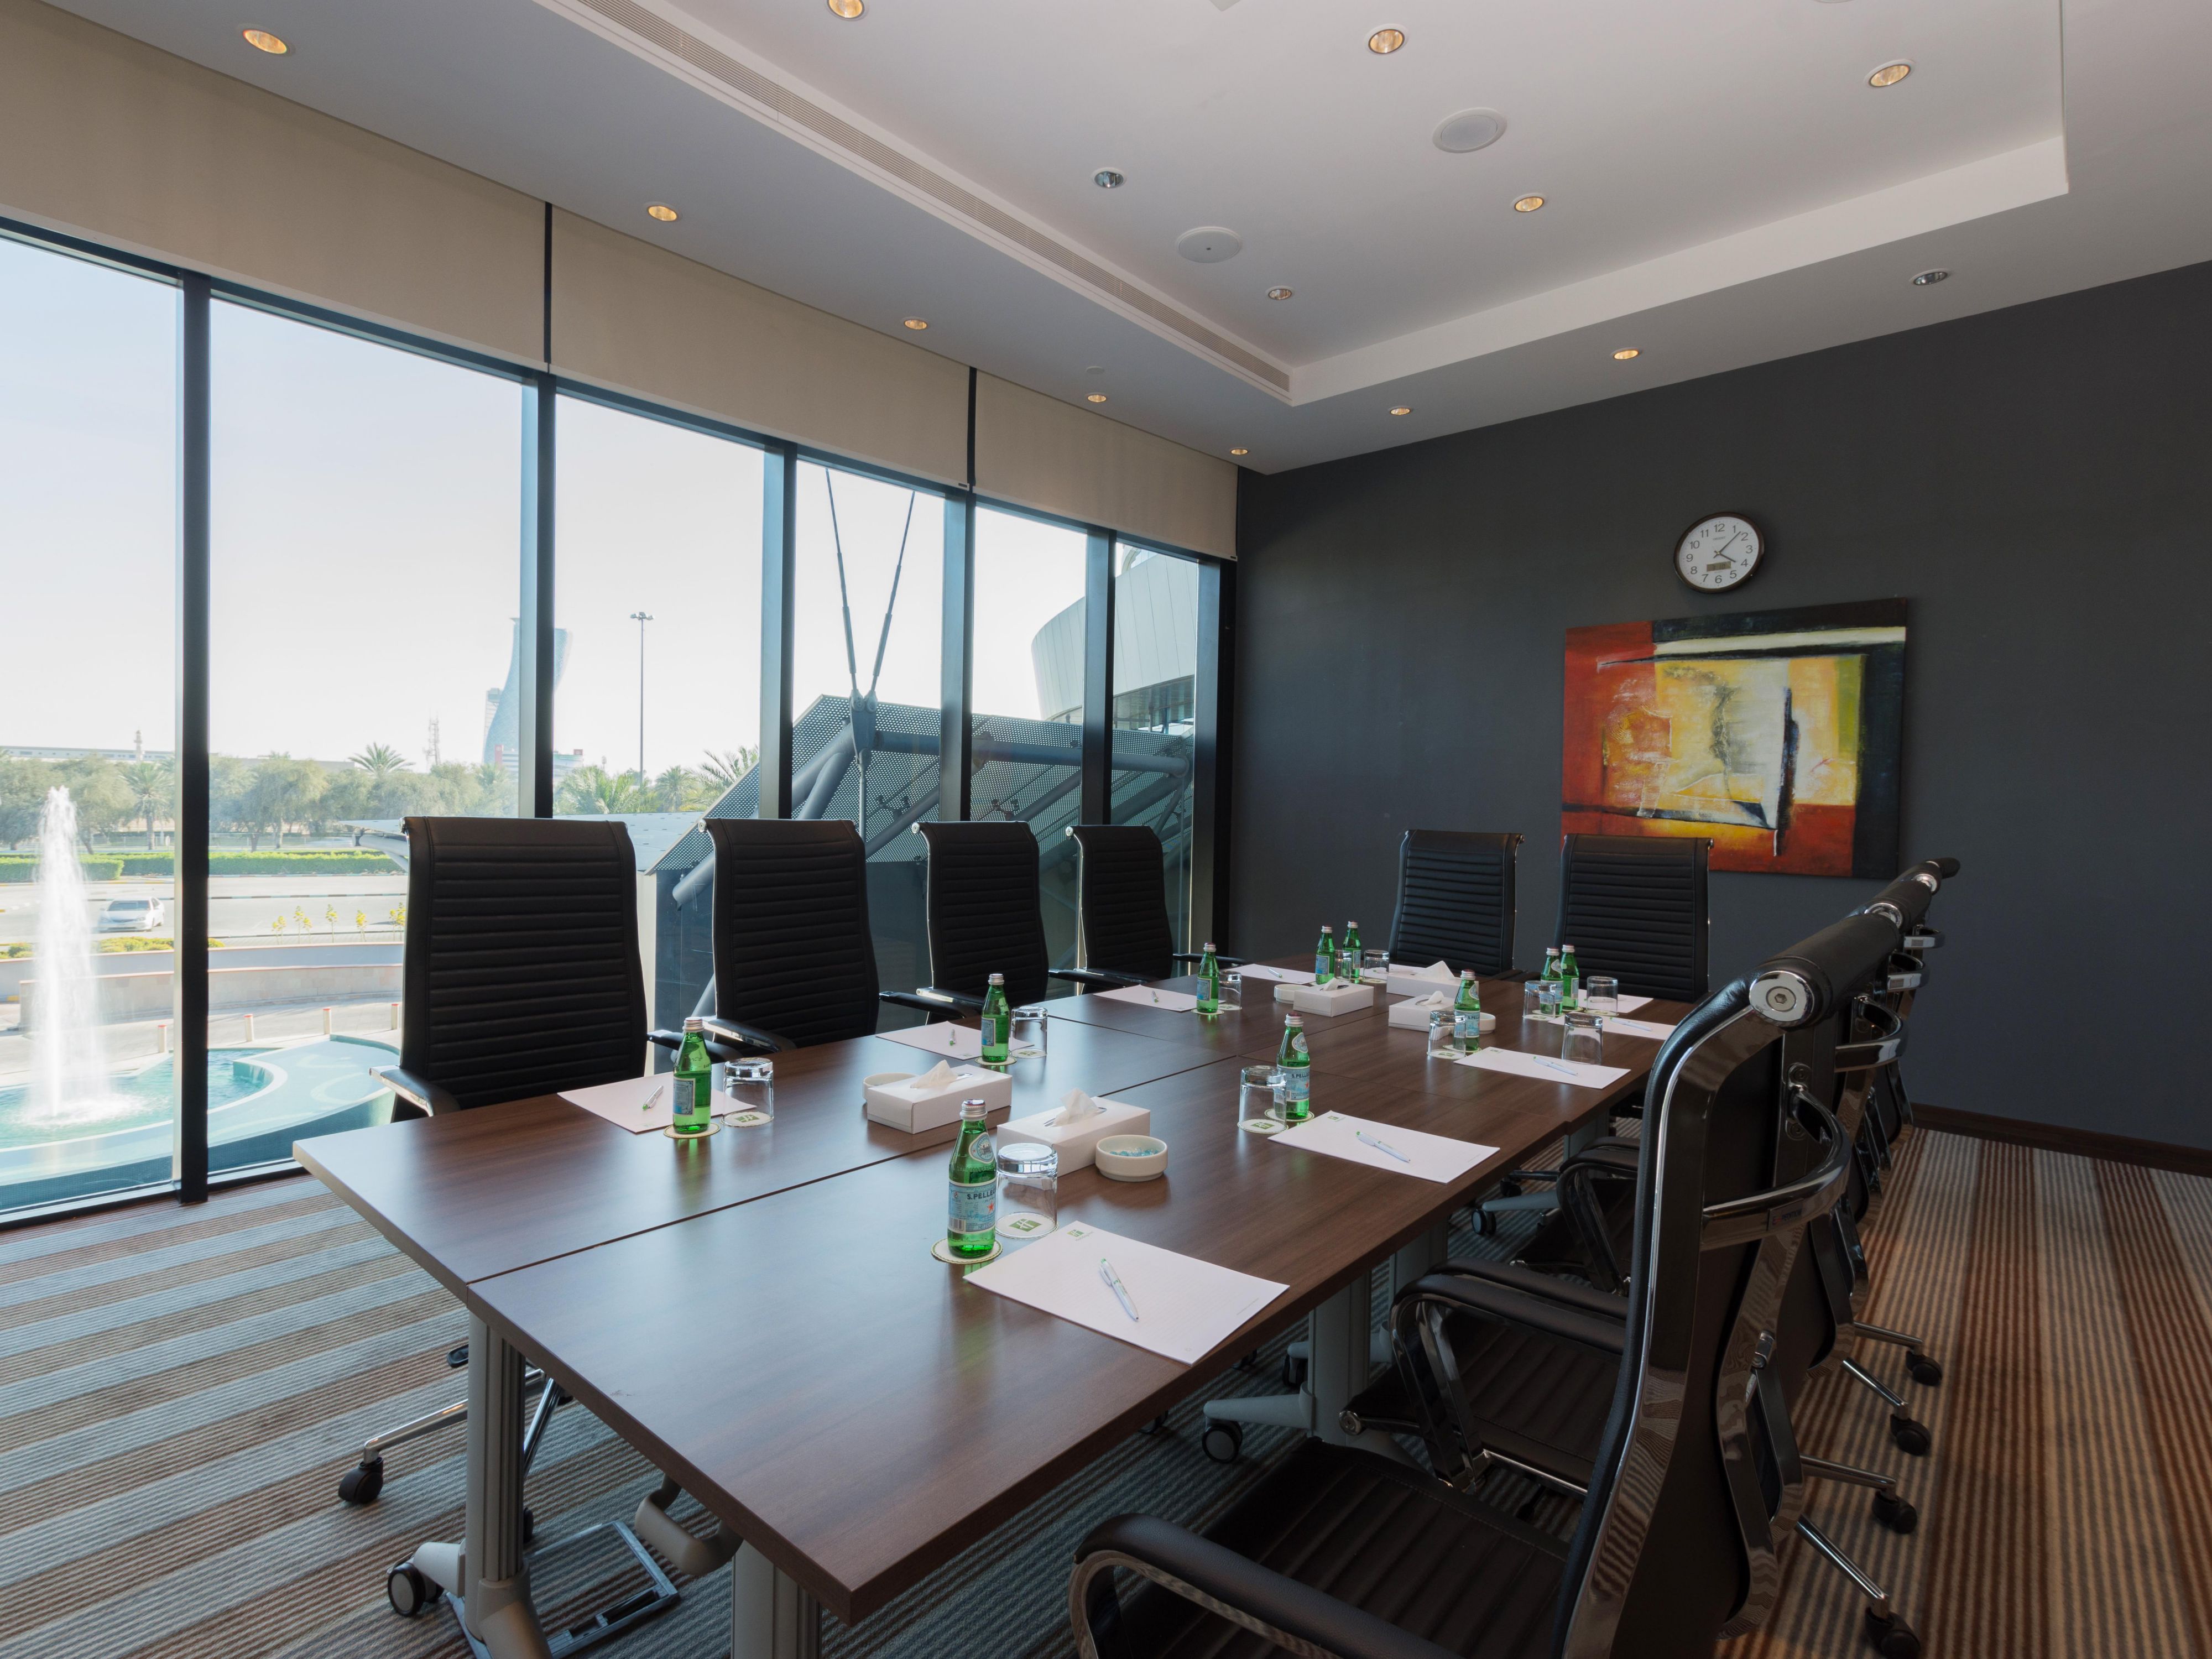 Make your next corporate event a success with our perfect venue. Impress your colleagues and clients with the stunning event spaces. From small meetings to large conferences, Holiday Inn® Abu Dhabi can accommodate your needs. Let us help you plan and execute a successful corporate event.